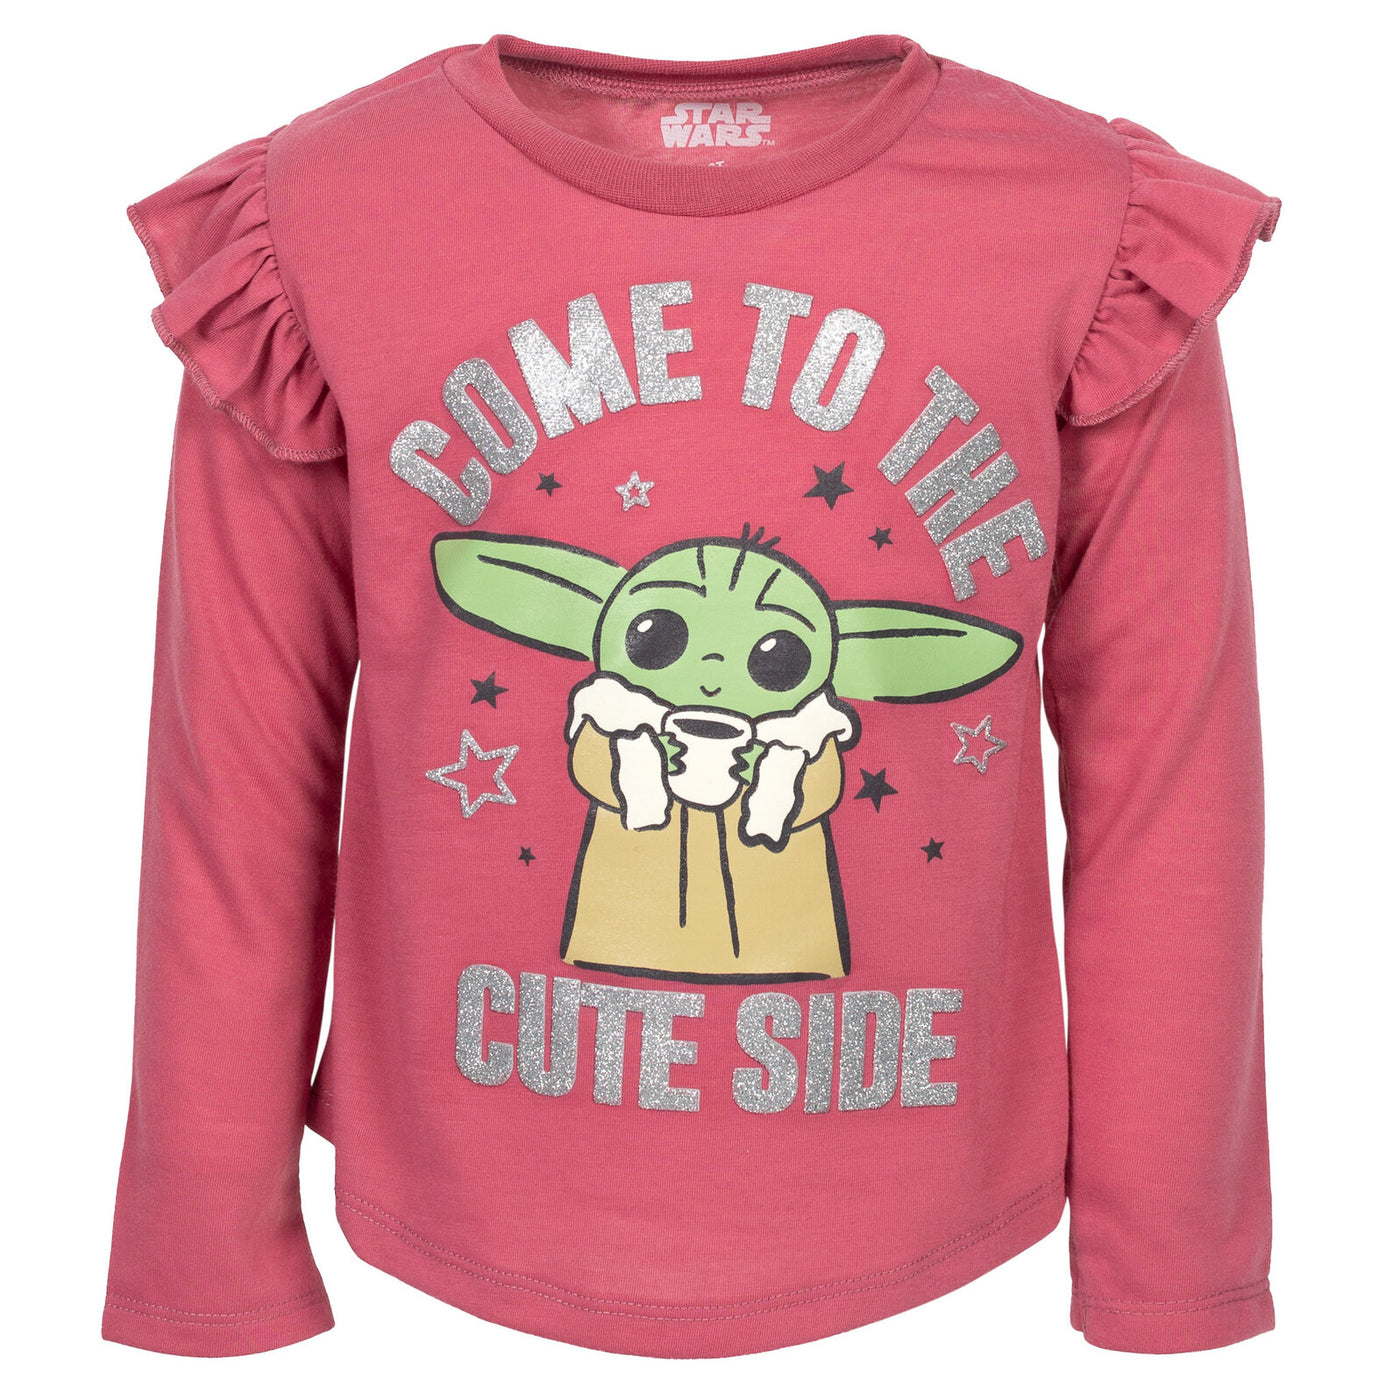 Star Wars Baby Yoda T-Shirt and Leggings Outfit Set